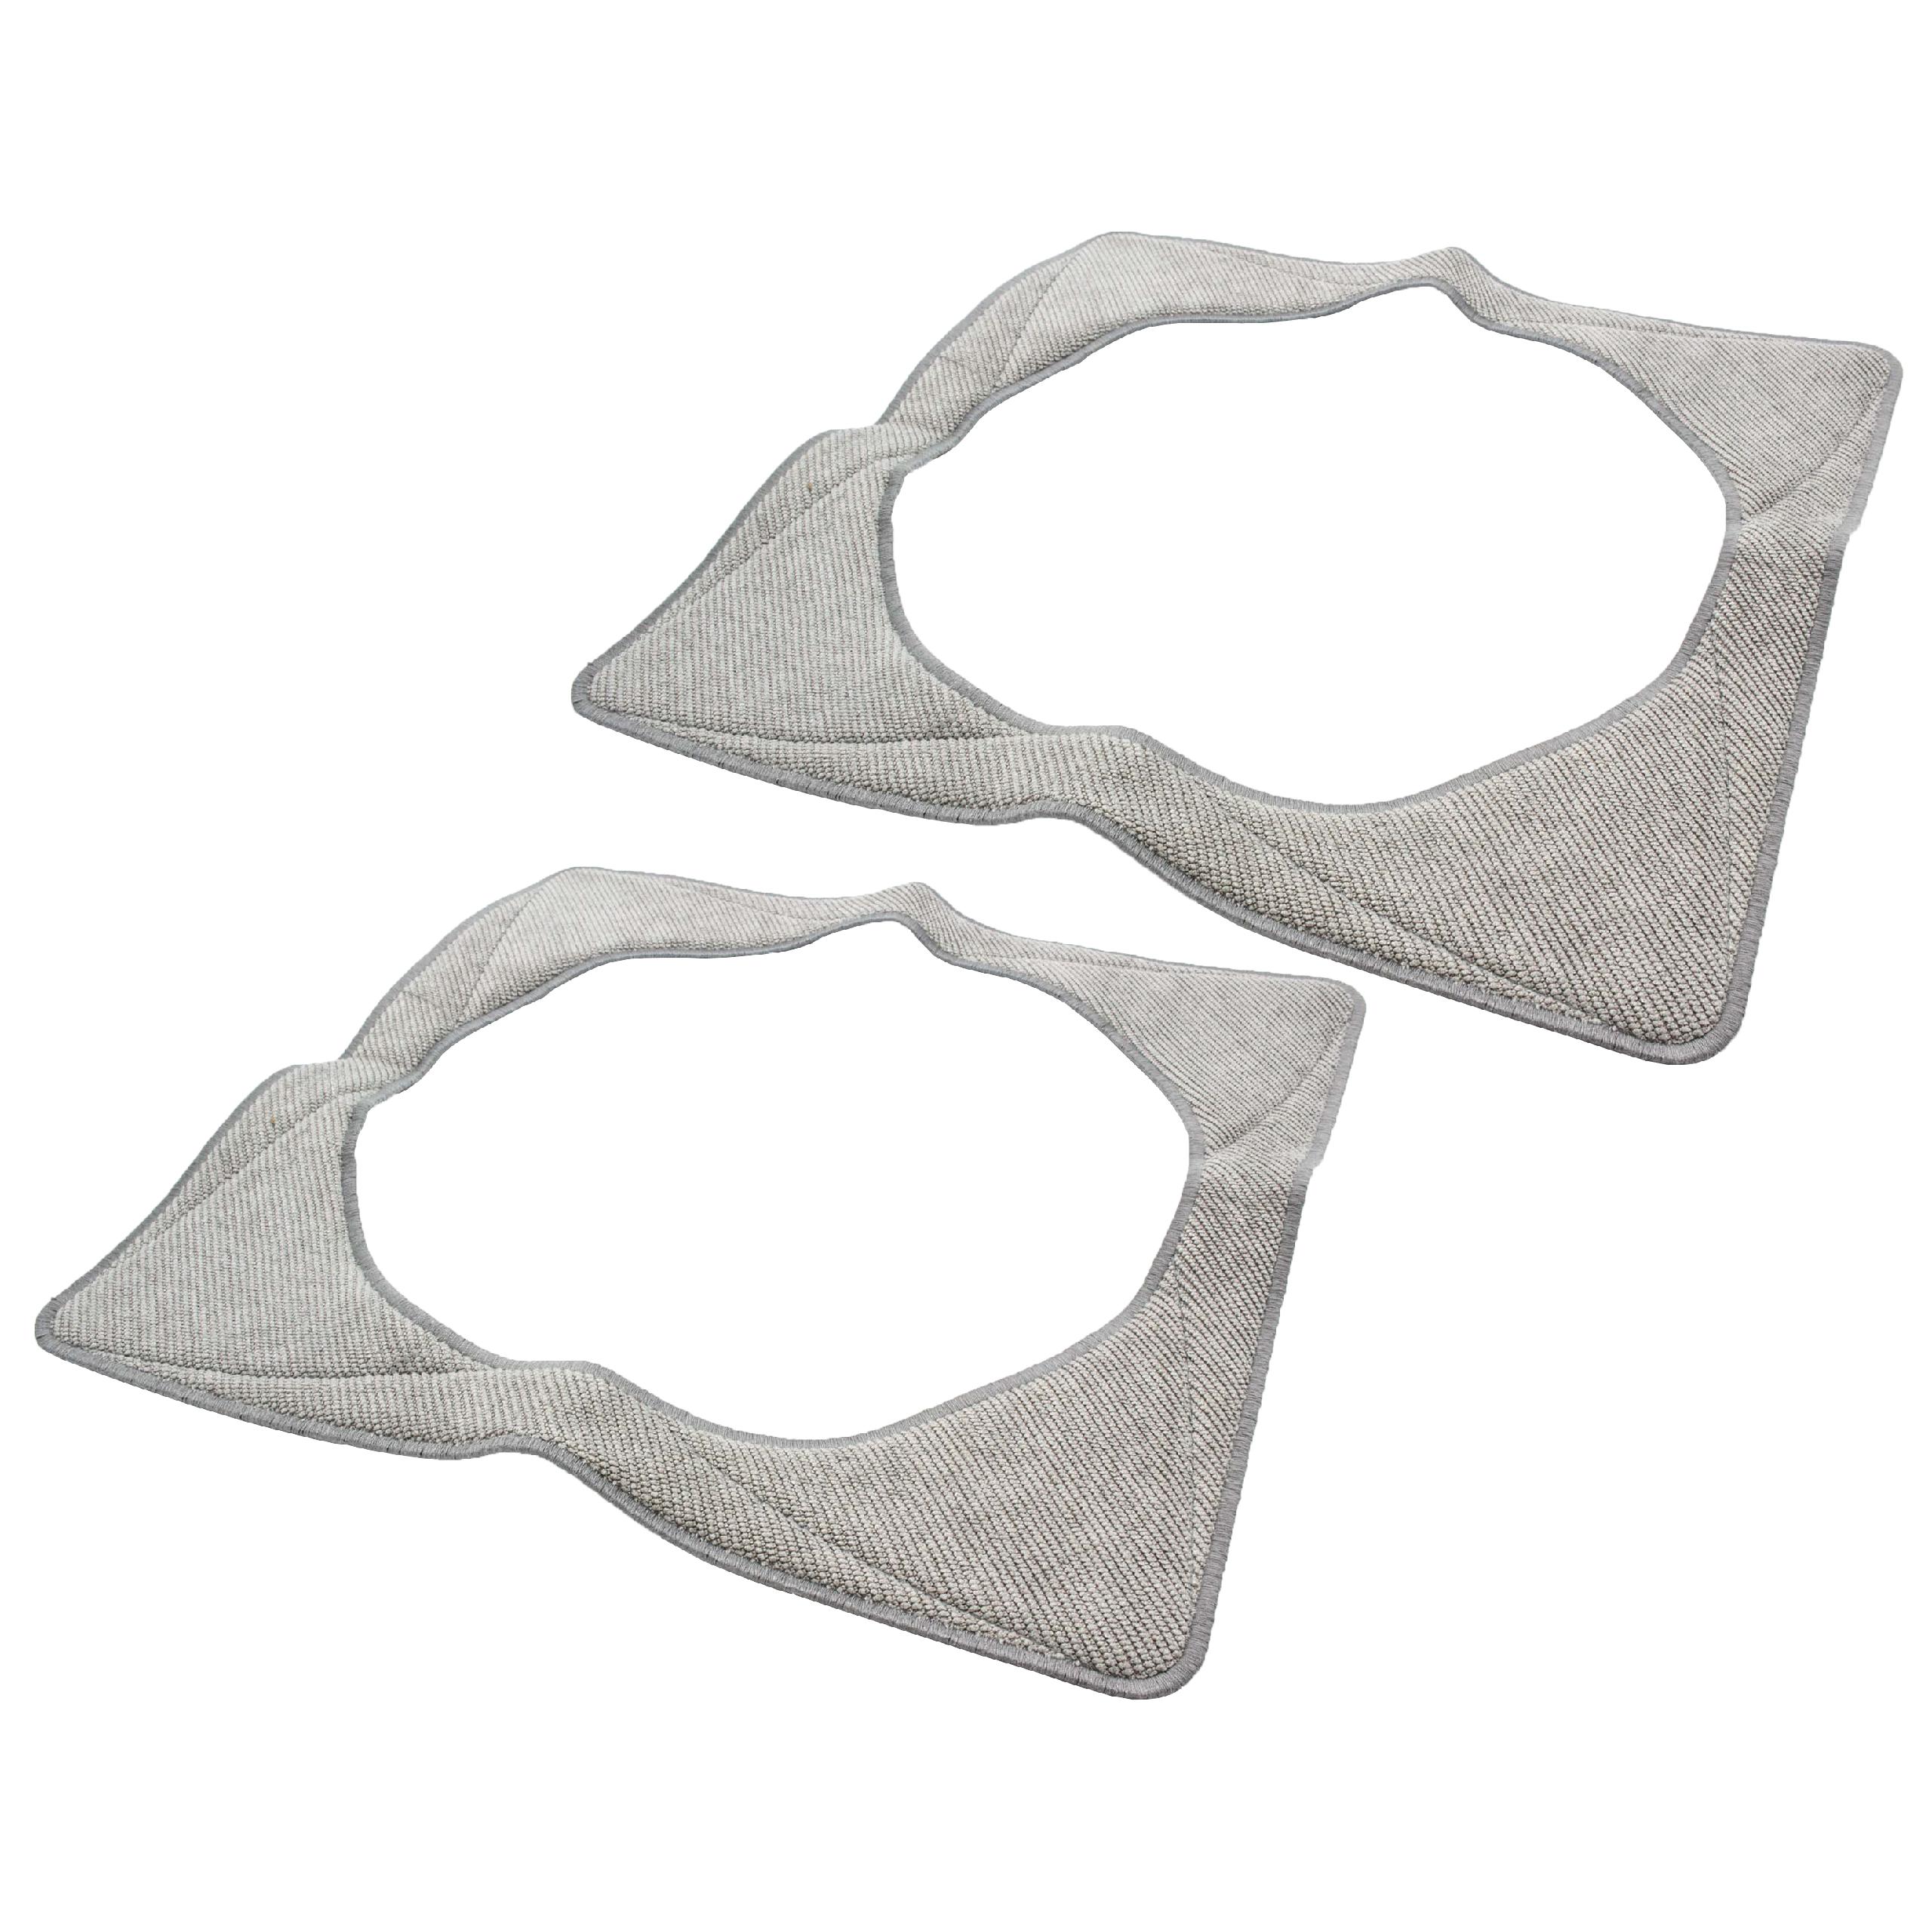  Cleaning Cloth Set (2 Part) suitable for Ecovacs Winbot W-930 Window Cleaning Robot - microfibre